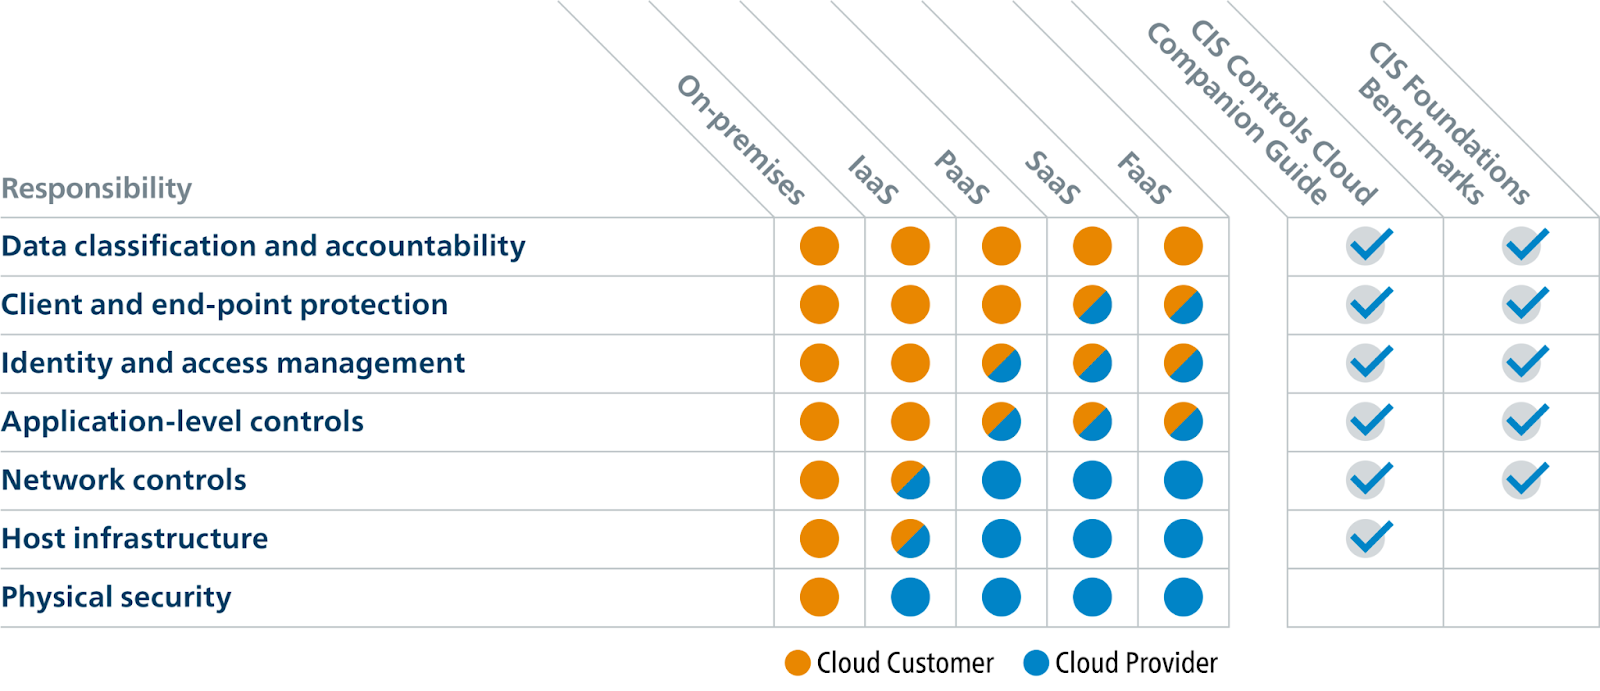 differences in division of responsibility across different cloud models